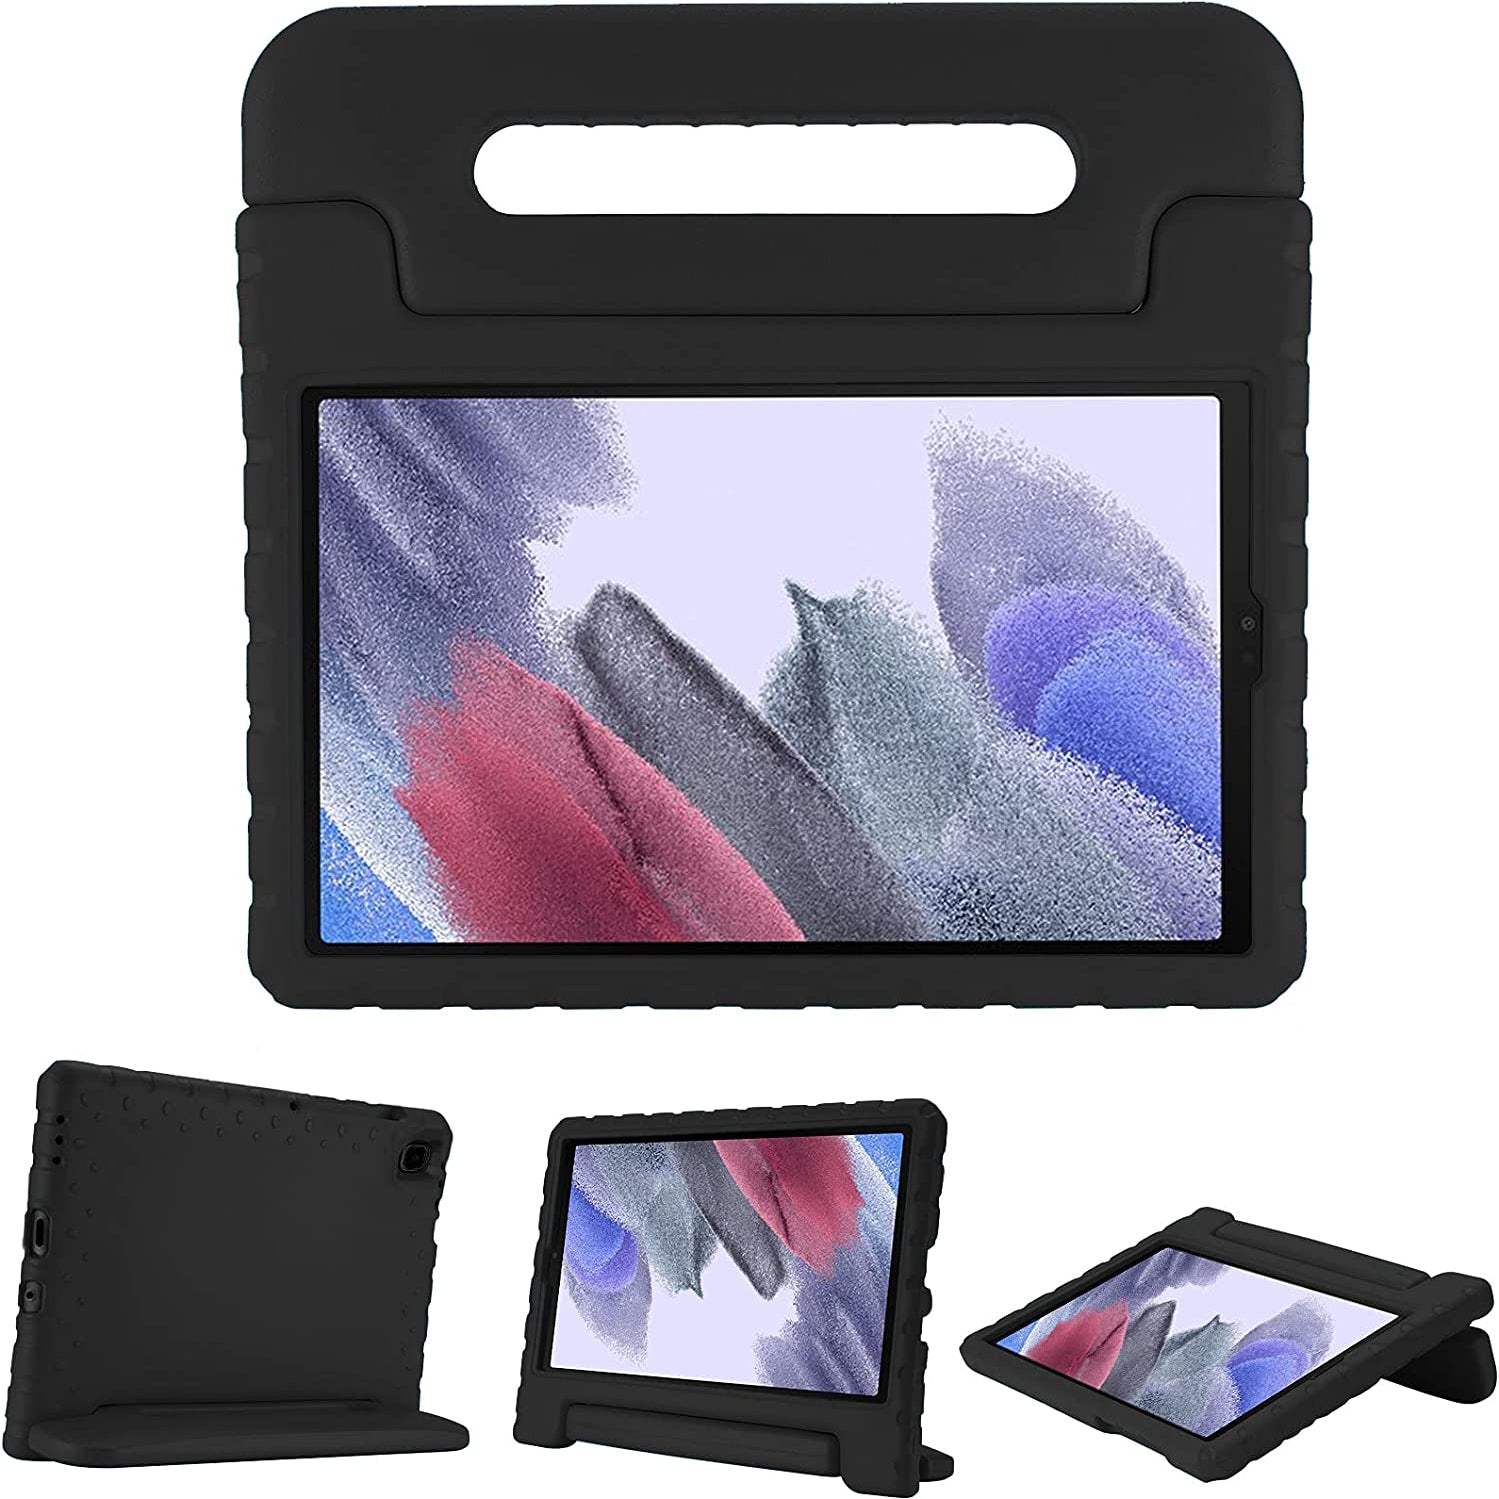 For Samsung Galaxy Tab A7 Lite Kids Case Shockproof Cover With Stand - Black-Samsung Tablet Cases & Covers-First Help Tech